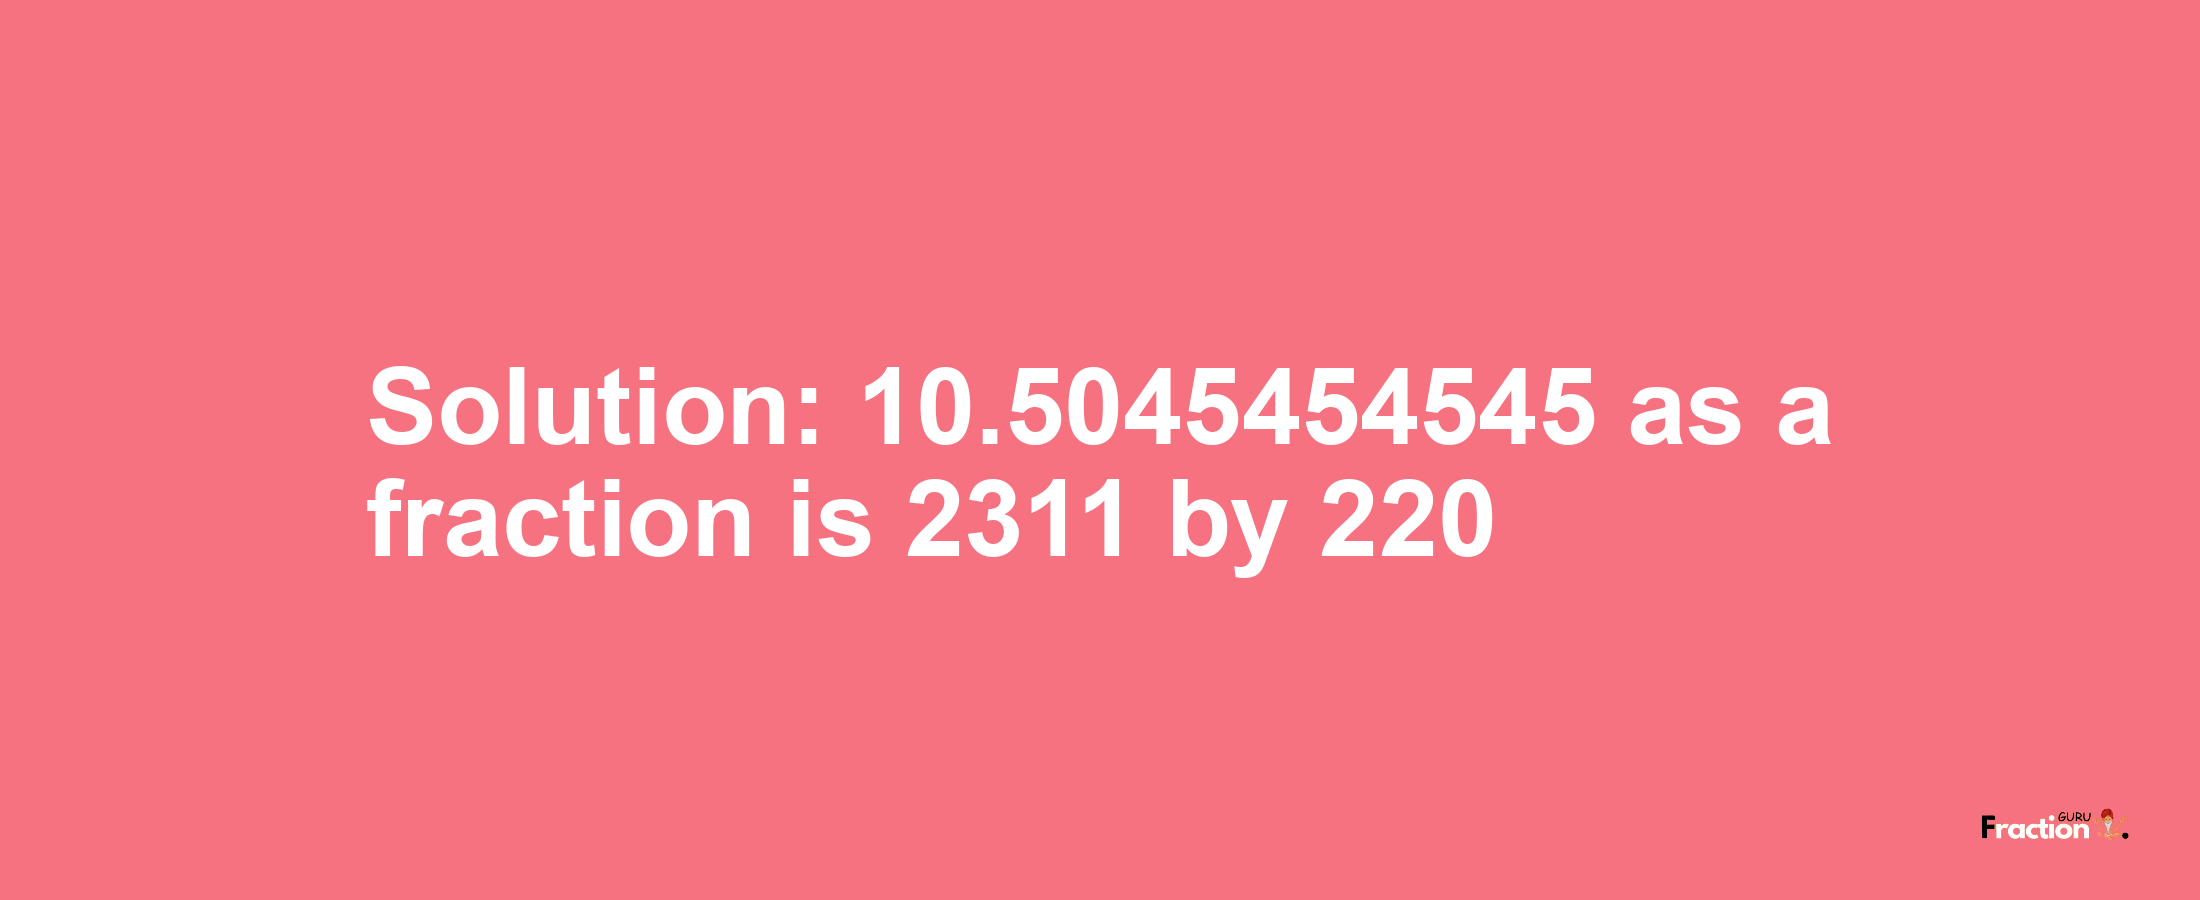 Solution:10.5045454545 as a fraction is 2311/220